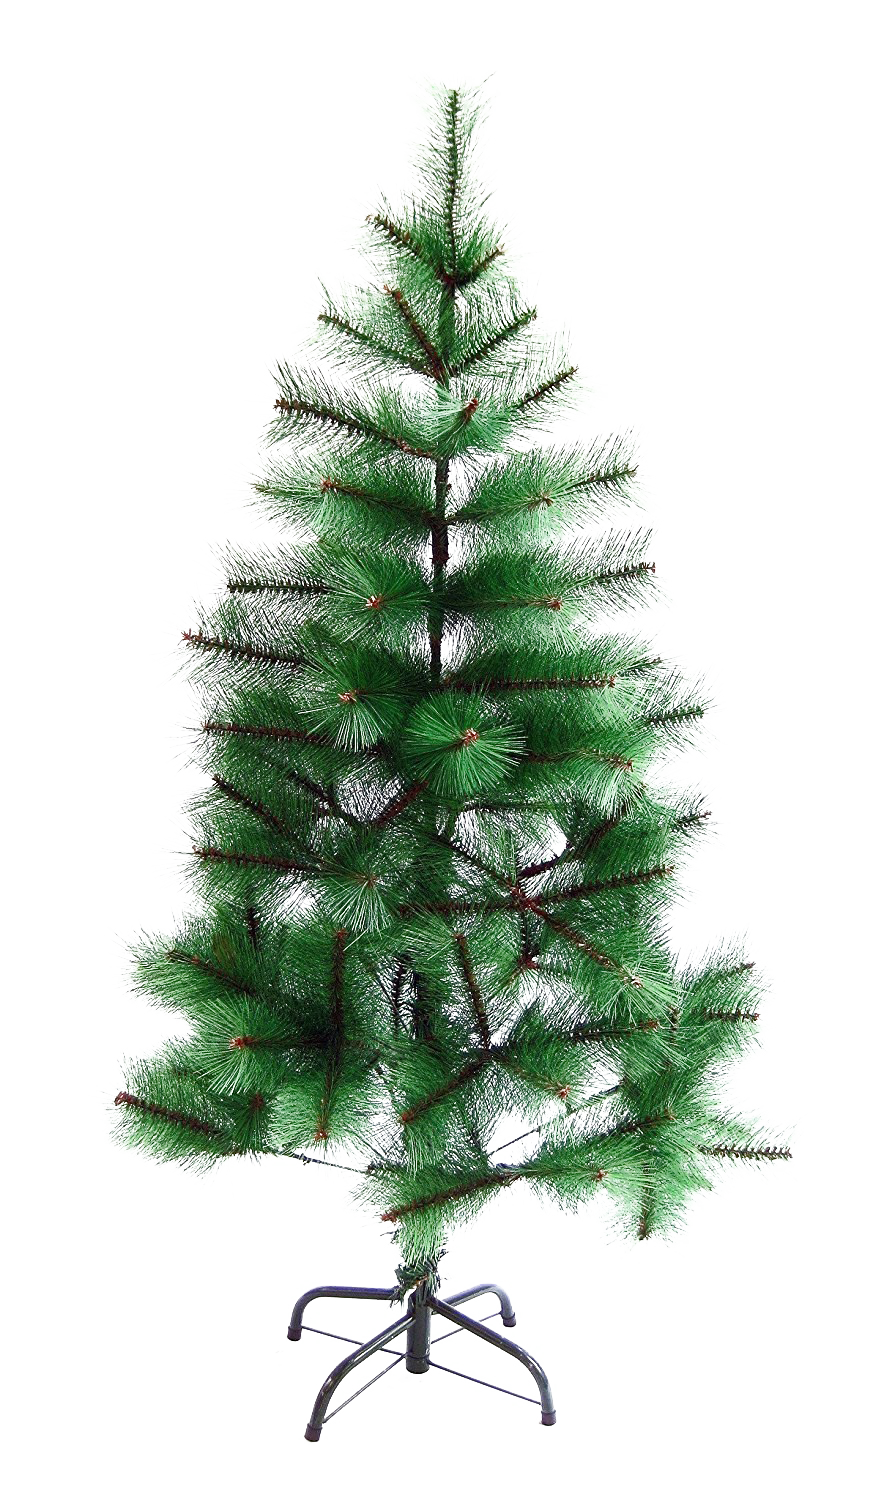 Download PNG image - Christmas Pine Tree Transparent Background 